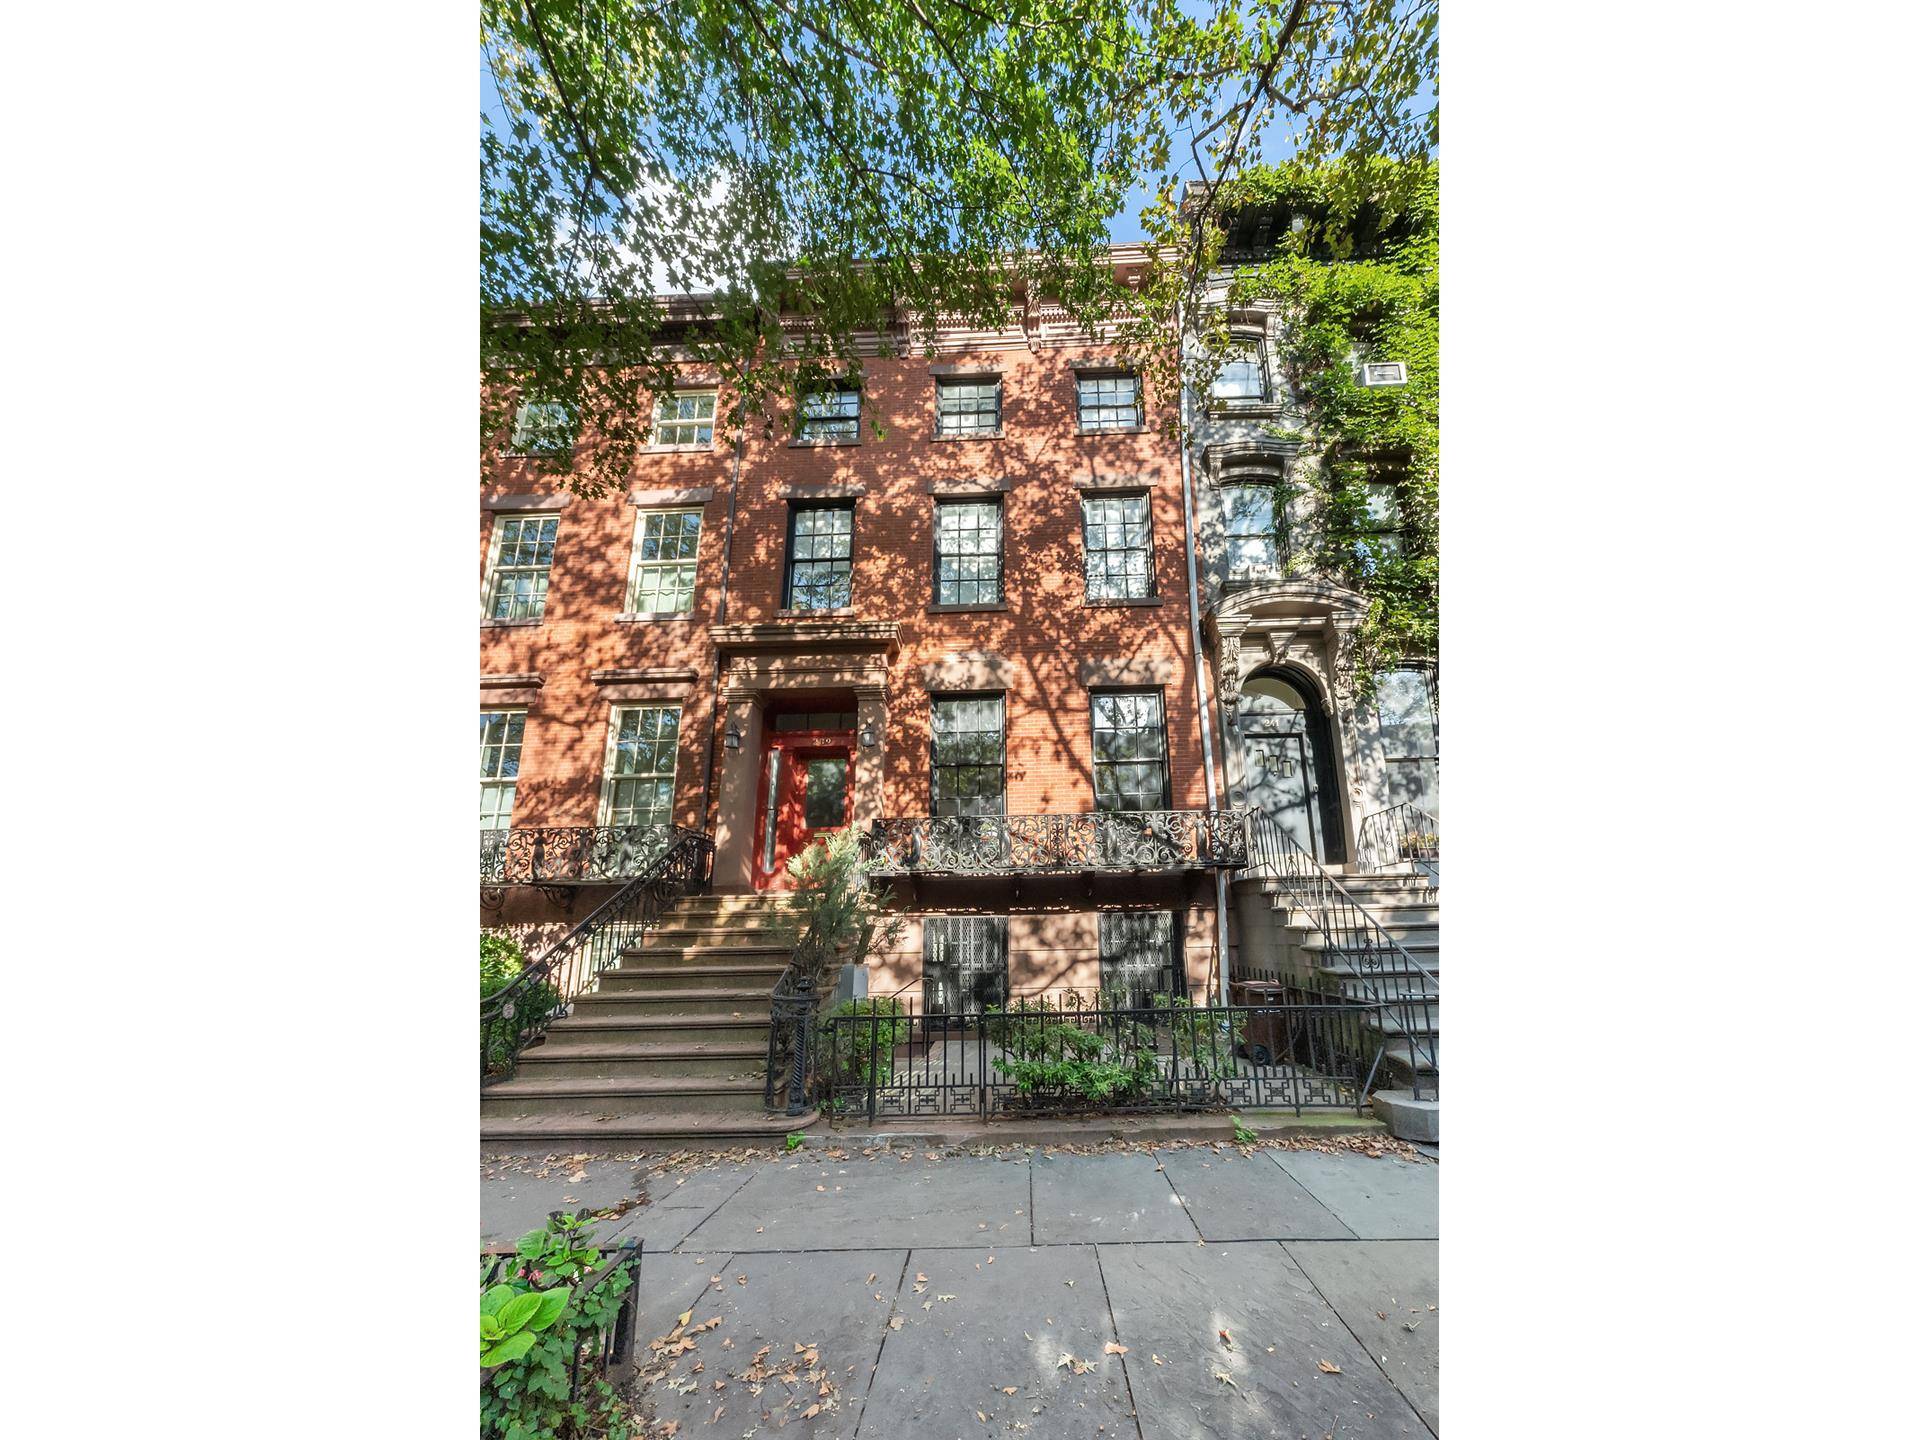 Please noteTaxes are 0J51 Abatement commenced in 2018Welcome to 239 Carlton Avenue, an exquisite 25' Greek Revival townhouse nestled on one of Brooklyn's most coveted blocks.